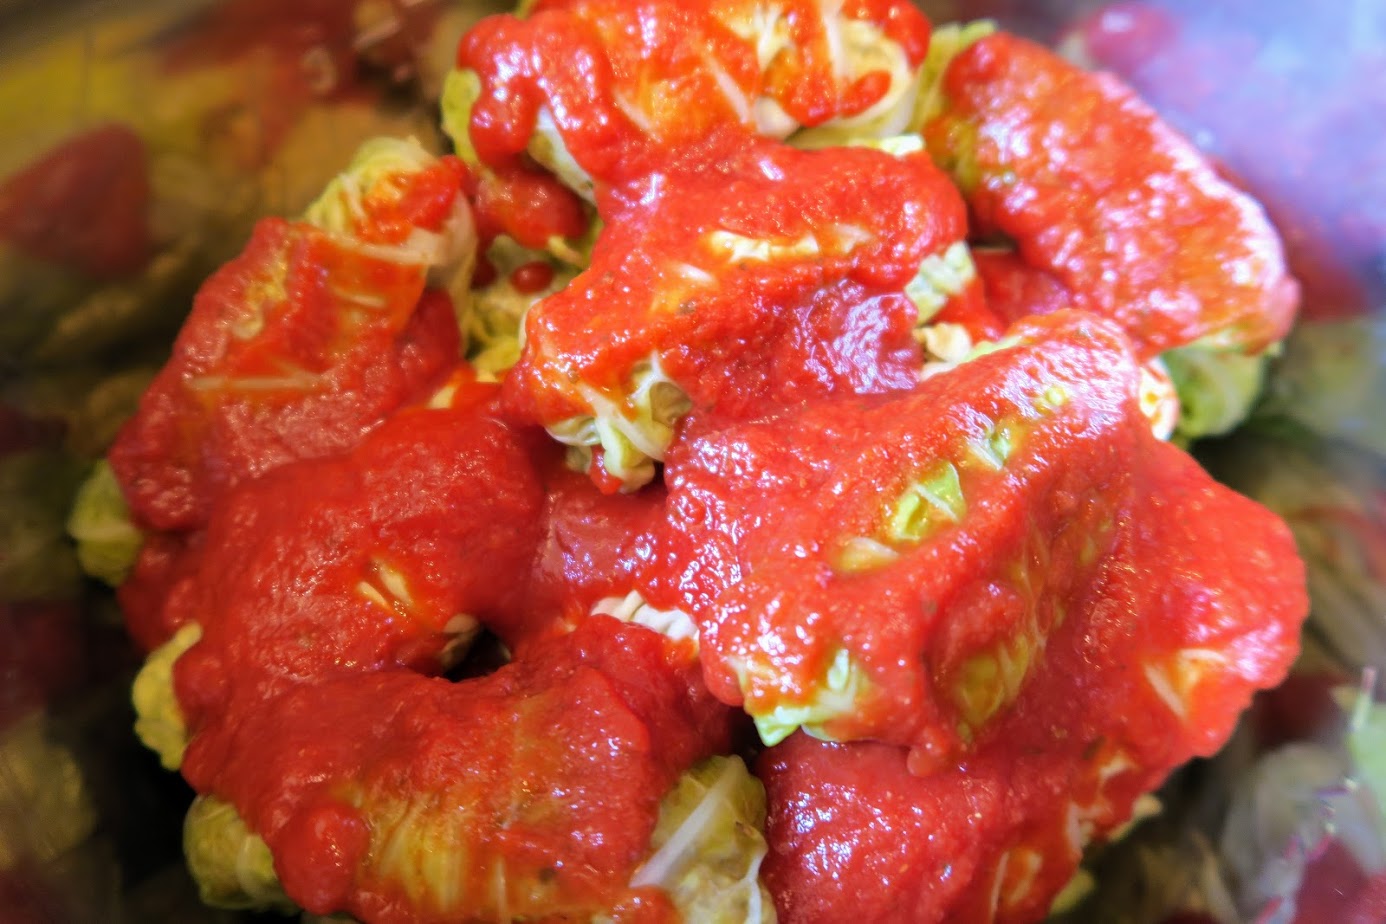 Uncooked cabbage rolls with an even distribution of tomato sauce on top